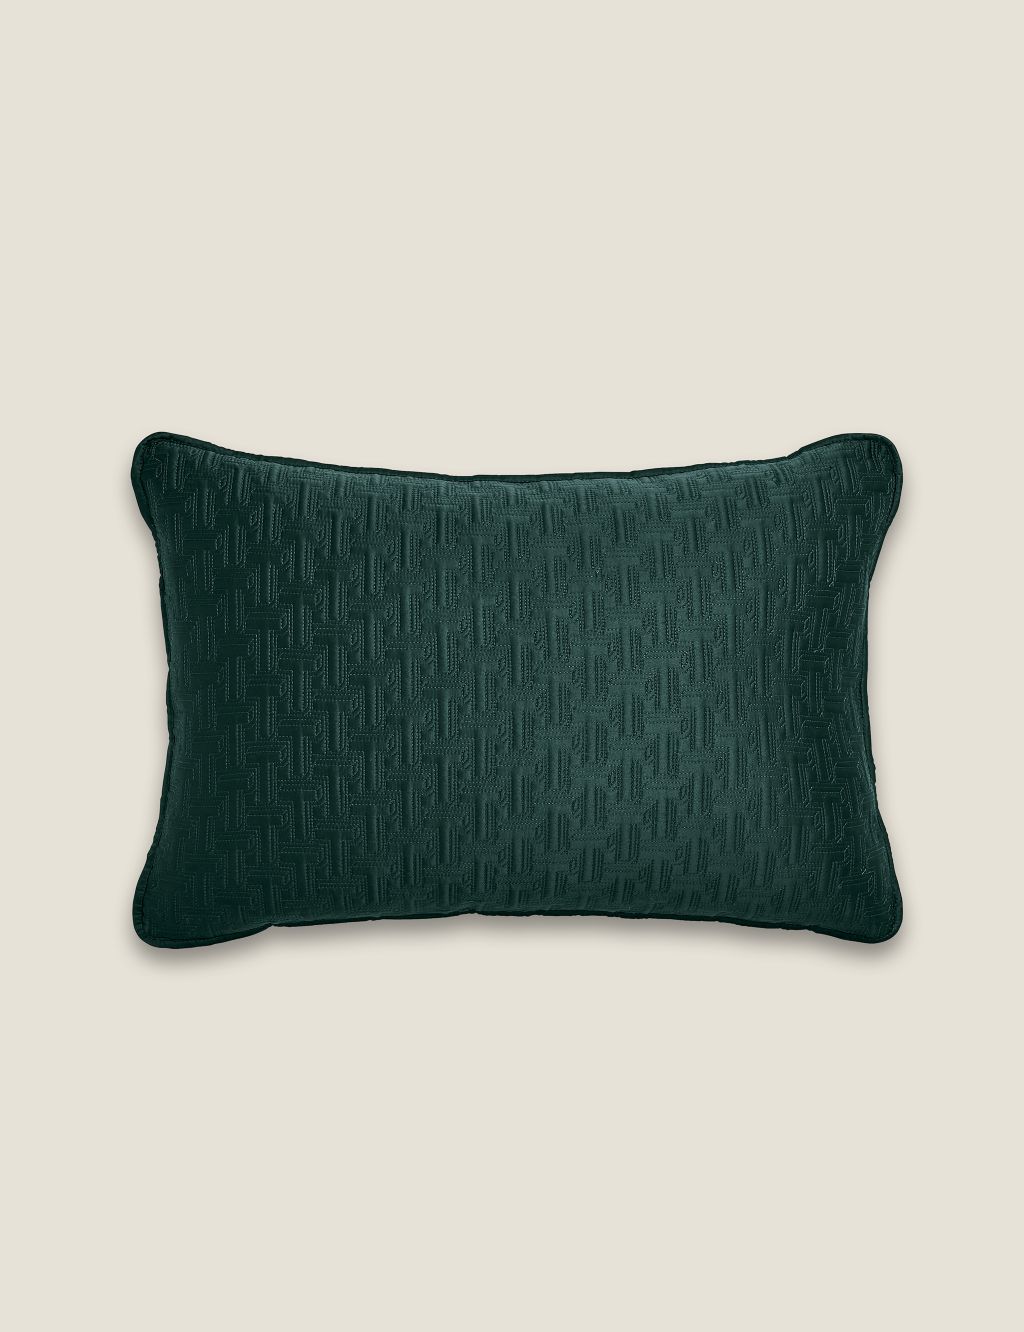 T Quilted Bolster Cushion image 1